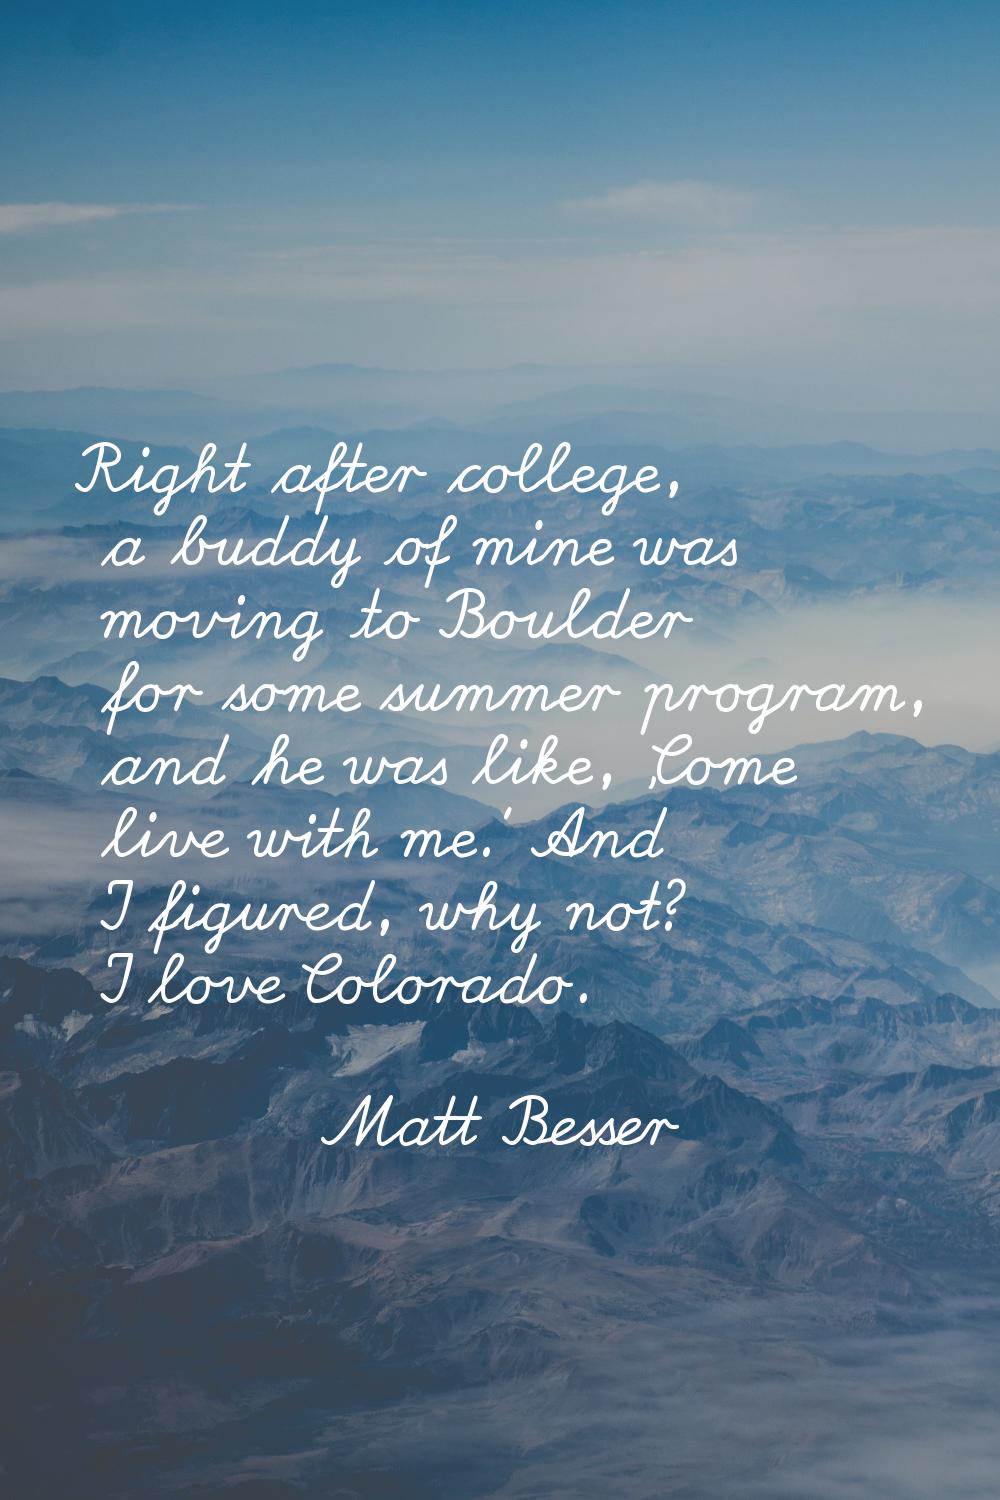 Right after college, a buddy of mine was moving to Boulder for some summer program, and he was like